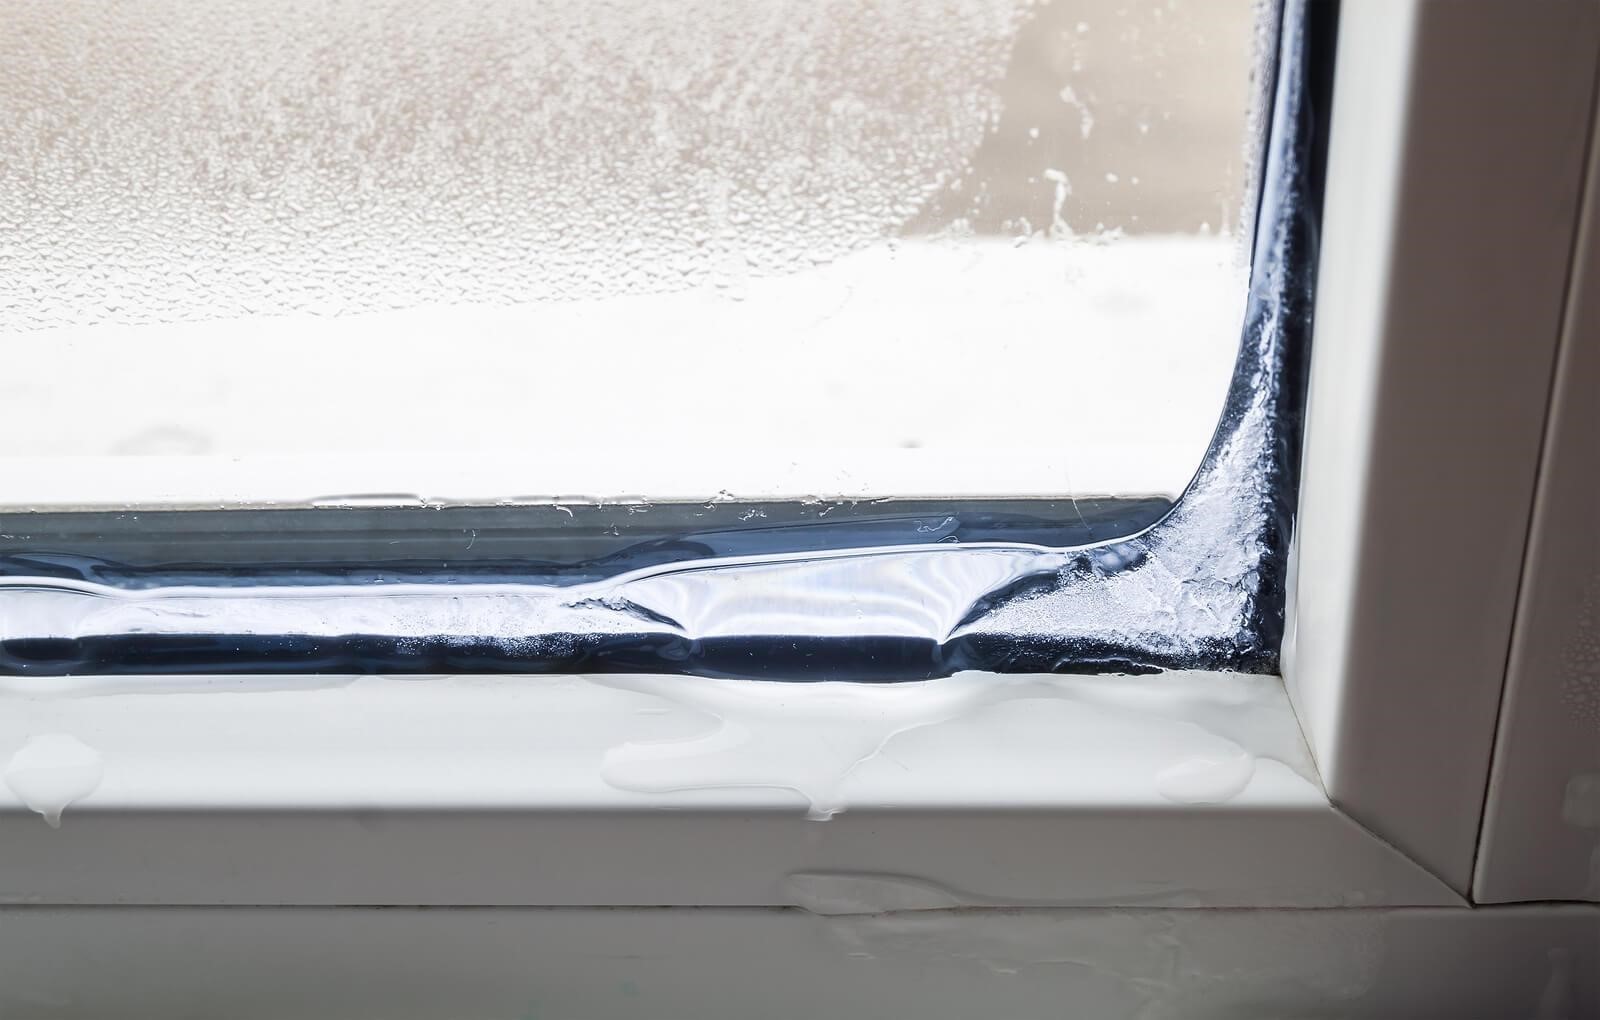 Frost build-up on window indoors